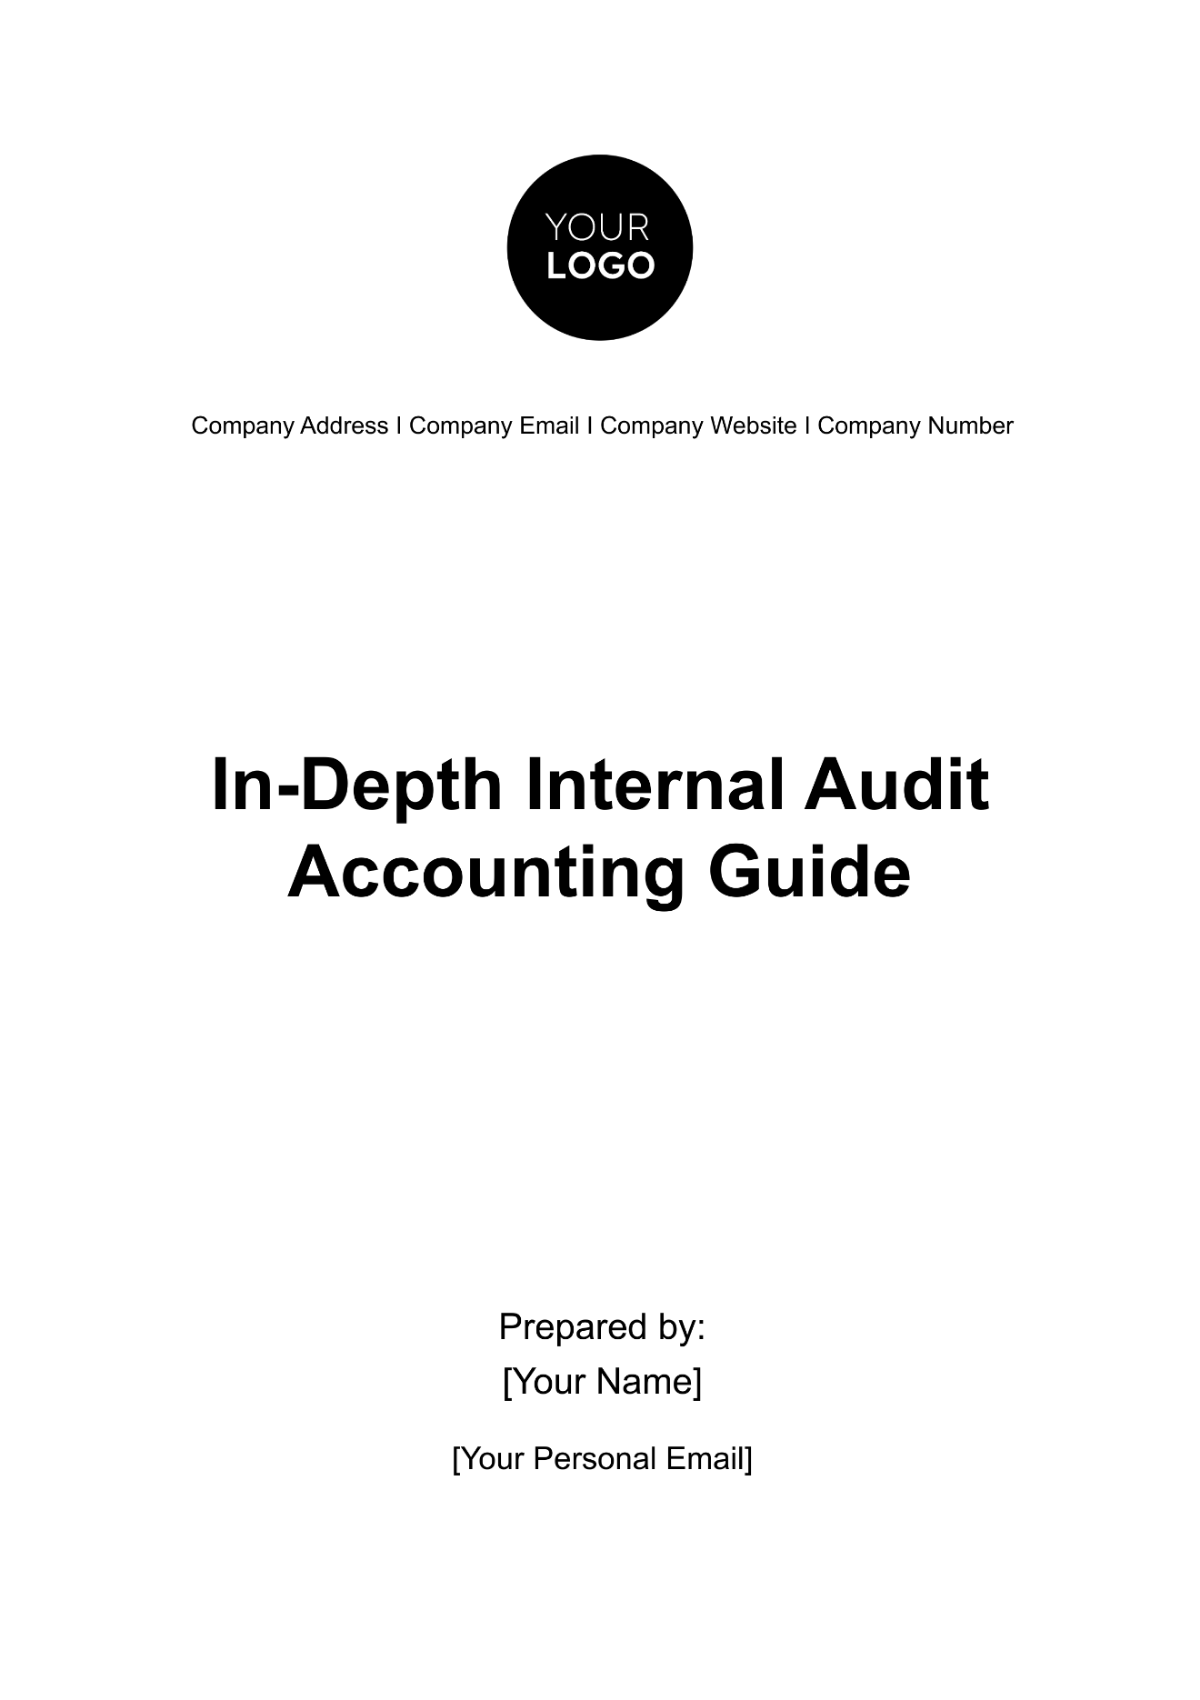 In-Depth Internal Audit Accounting Guide Template